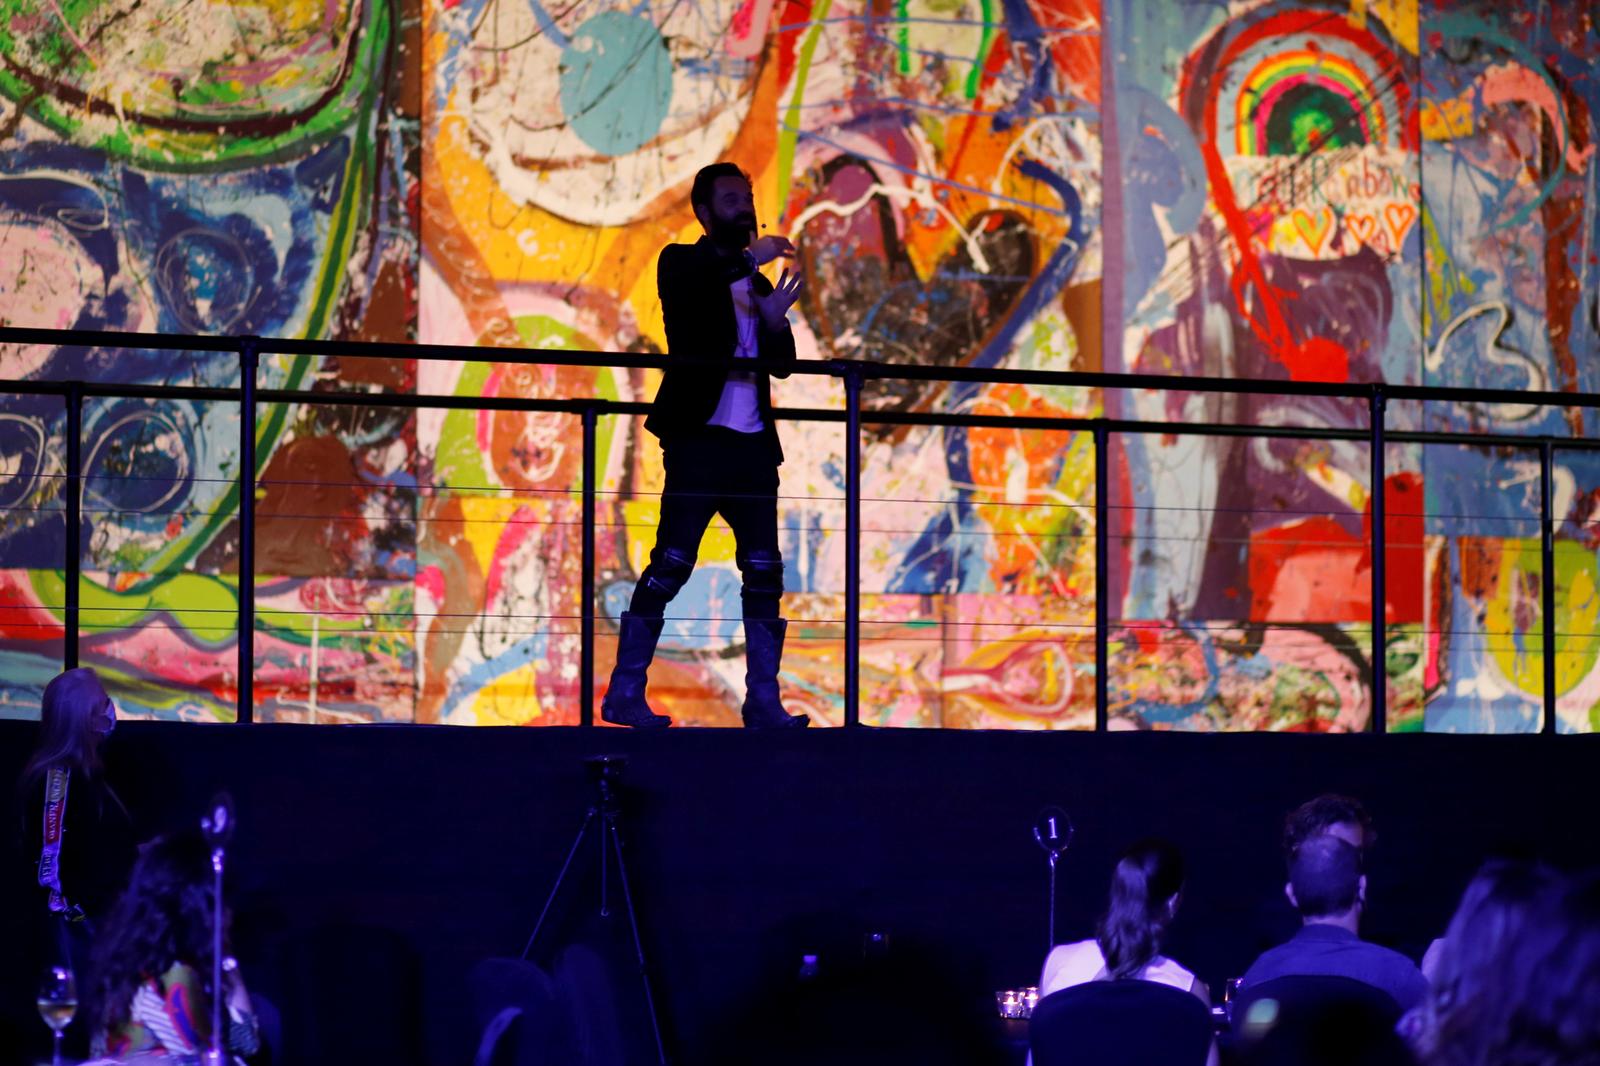 British artist Sacha Jafri speaks during an auction of his paintings at the Atlantis hotel in Dubai, United Arab Emirates March 22, 2021. Picture taken March 22, 2021. Photo: Reuters